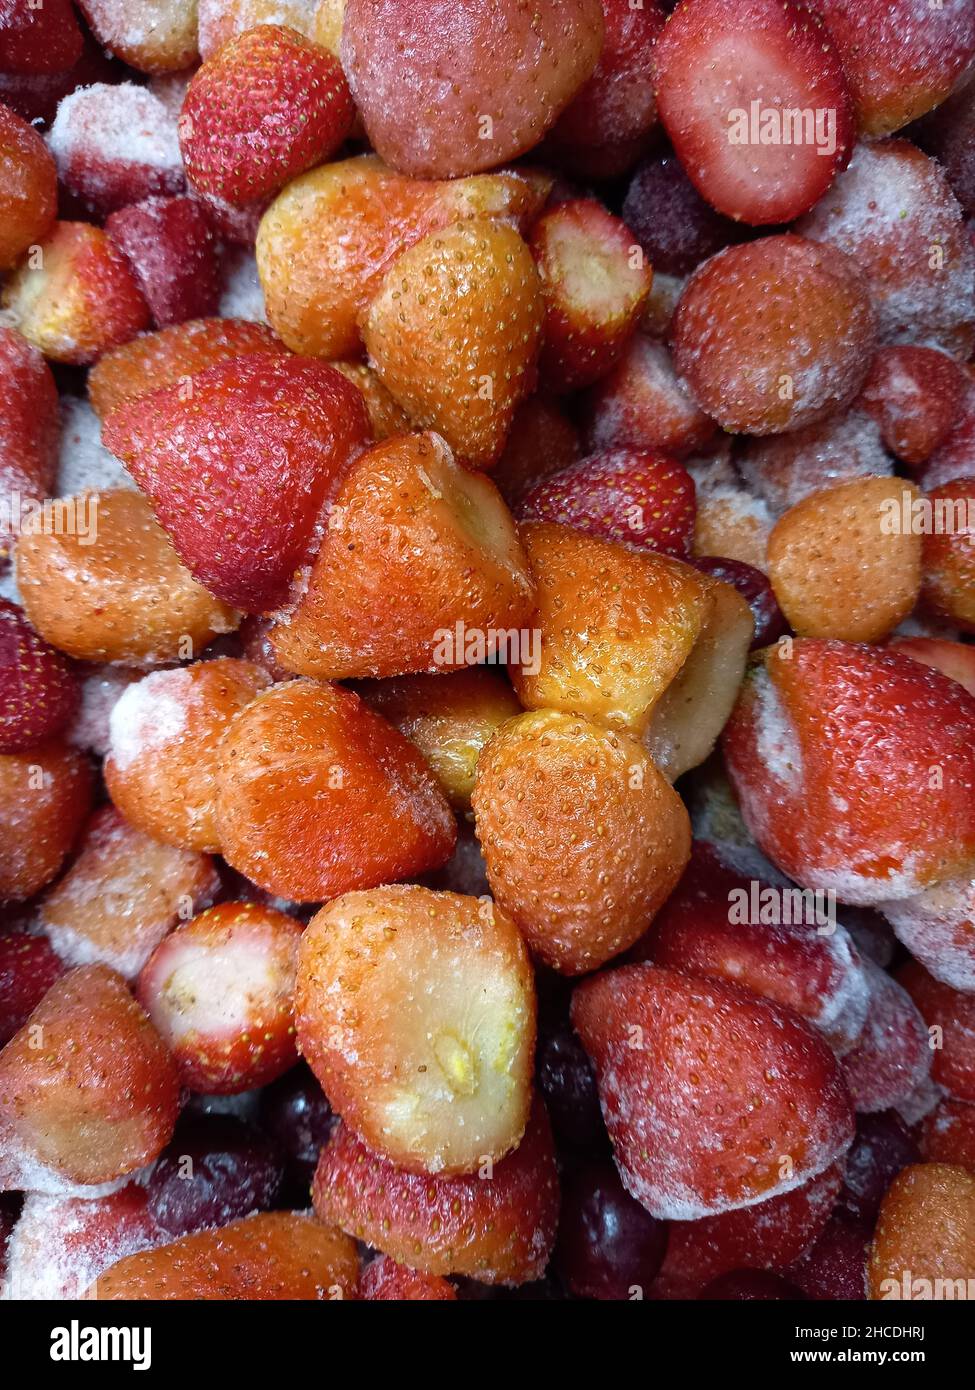 Berries of ripe red strawberries frozen on a display in a store. Stock Photo